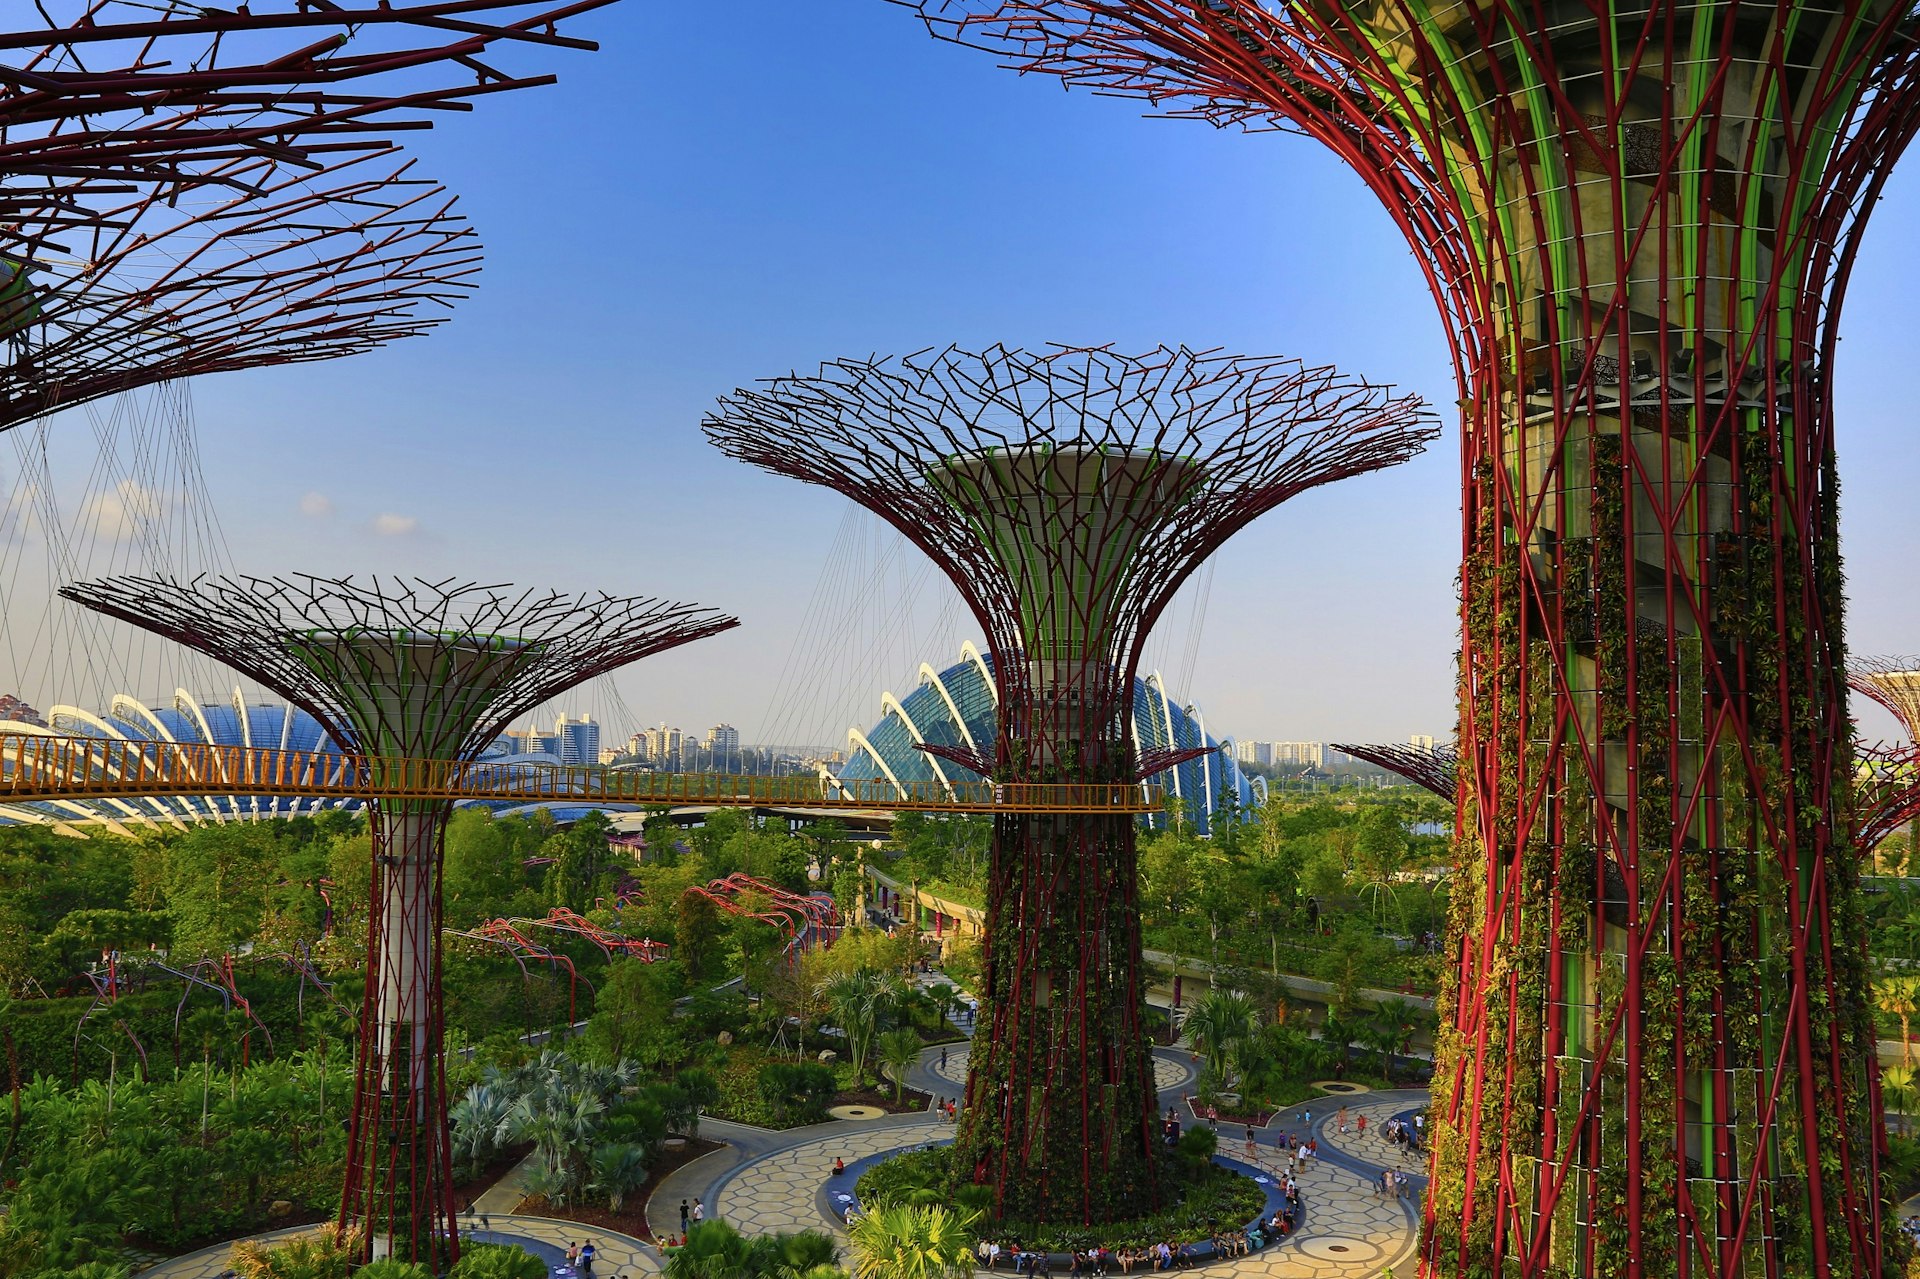 Several massive structures that blossom outward and upward (the Supertrees) are linked by an elevated walkway; within the Supertrees are vertical gardens. Below, on ground level, people walk along the circular paths that surround each tree.